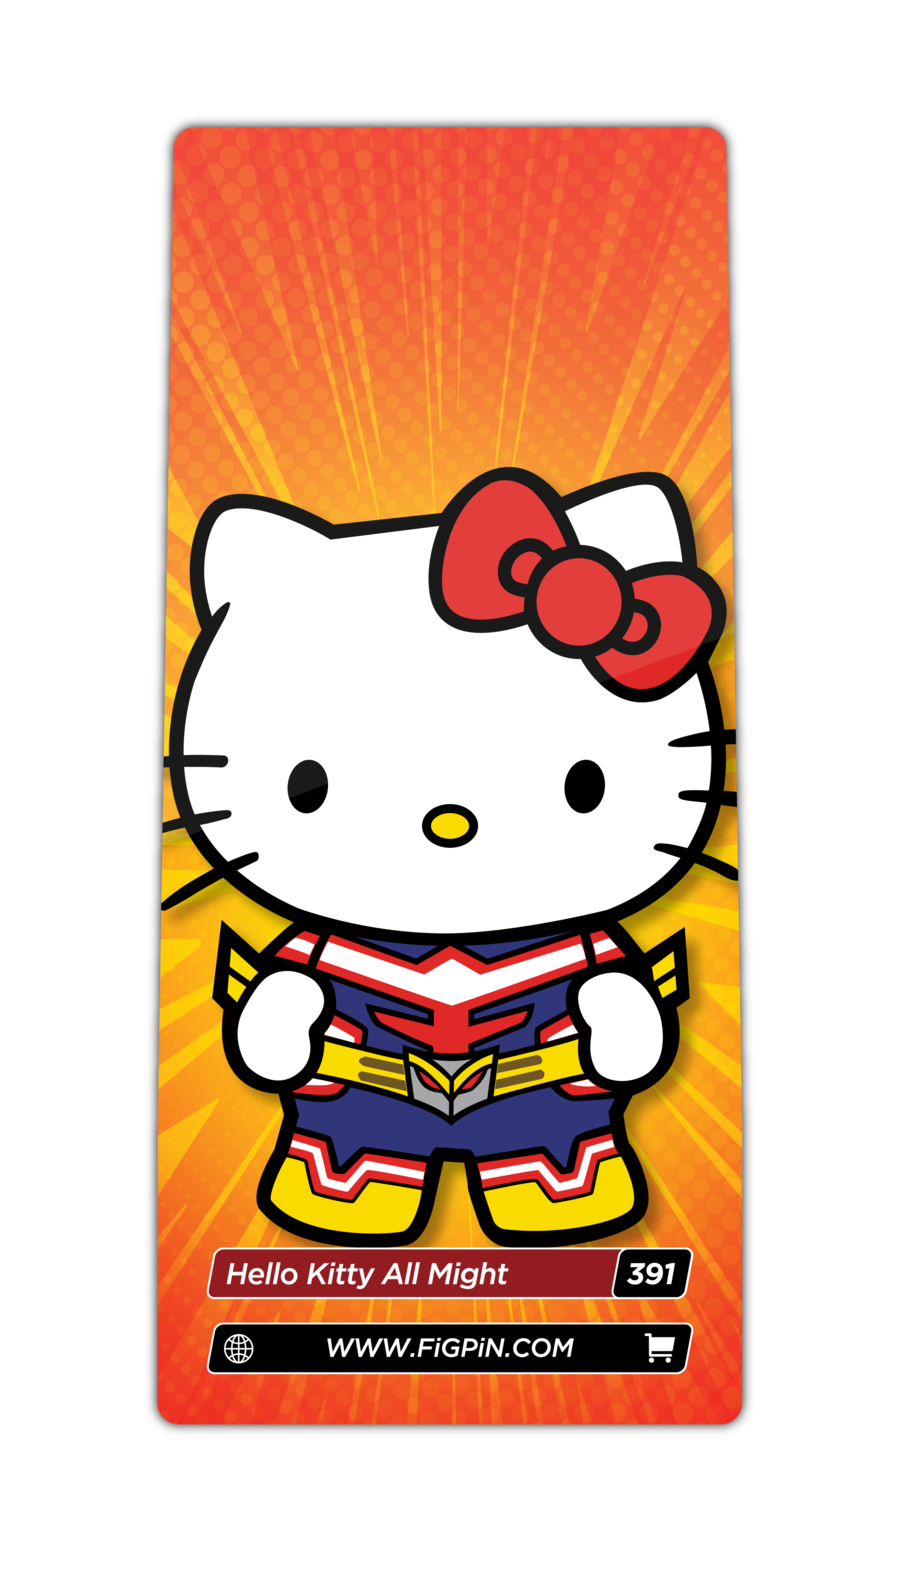 My Hero Academia - Hello Kitty All Might FiGPiN (#391) image count 3